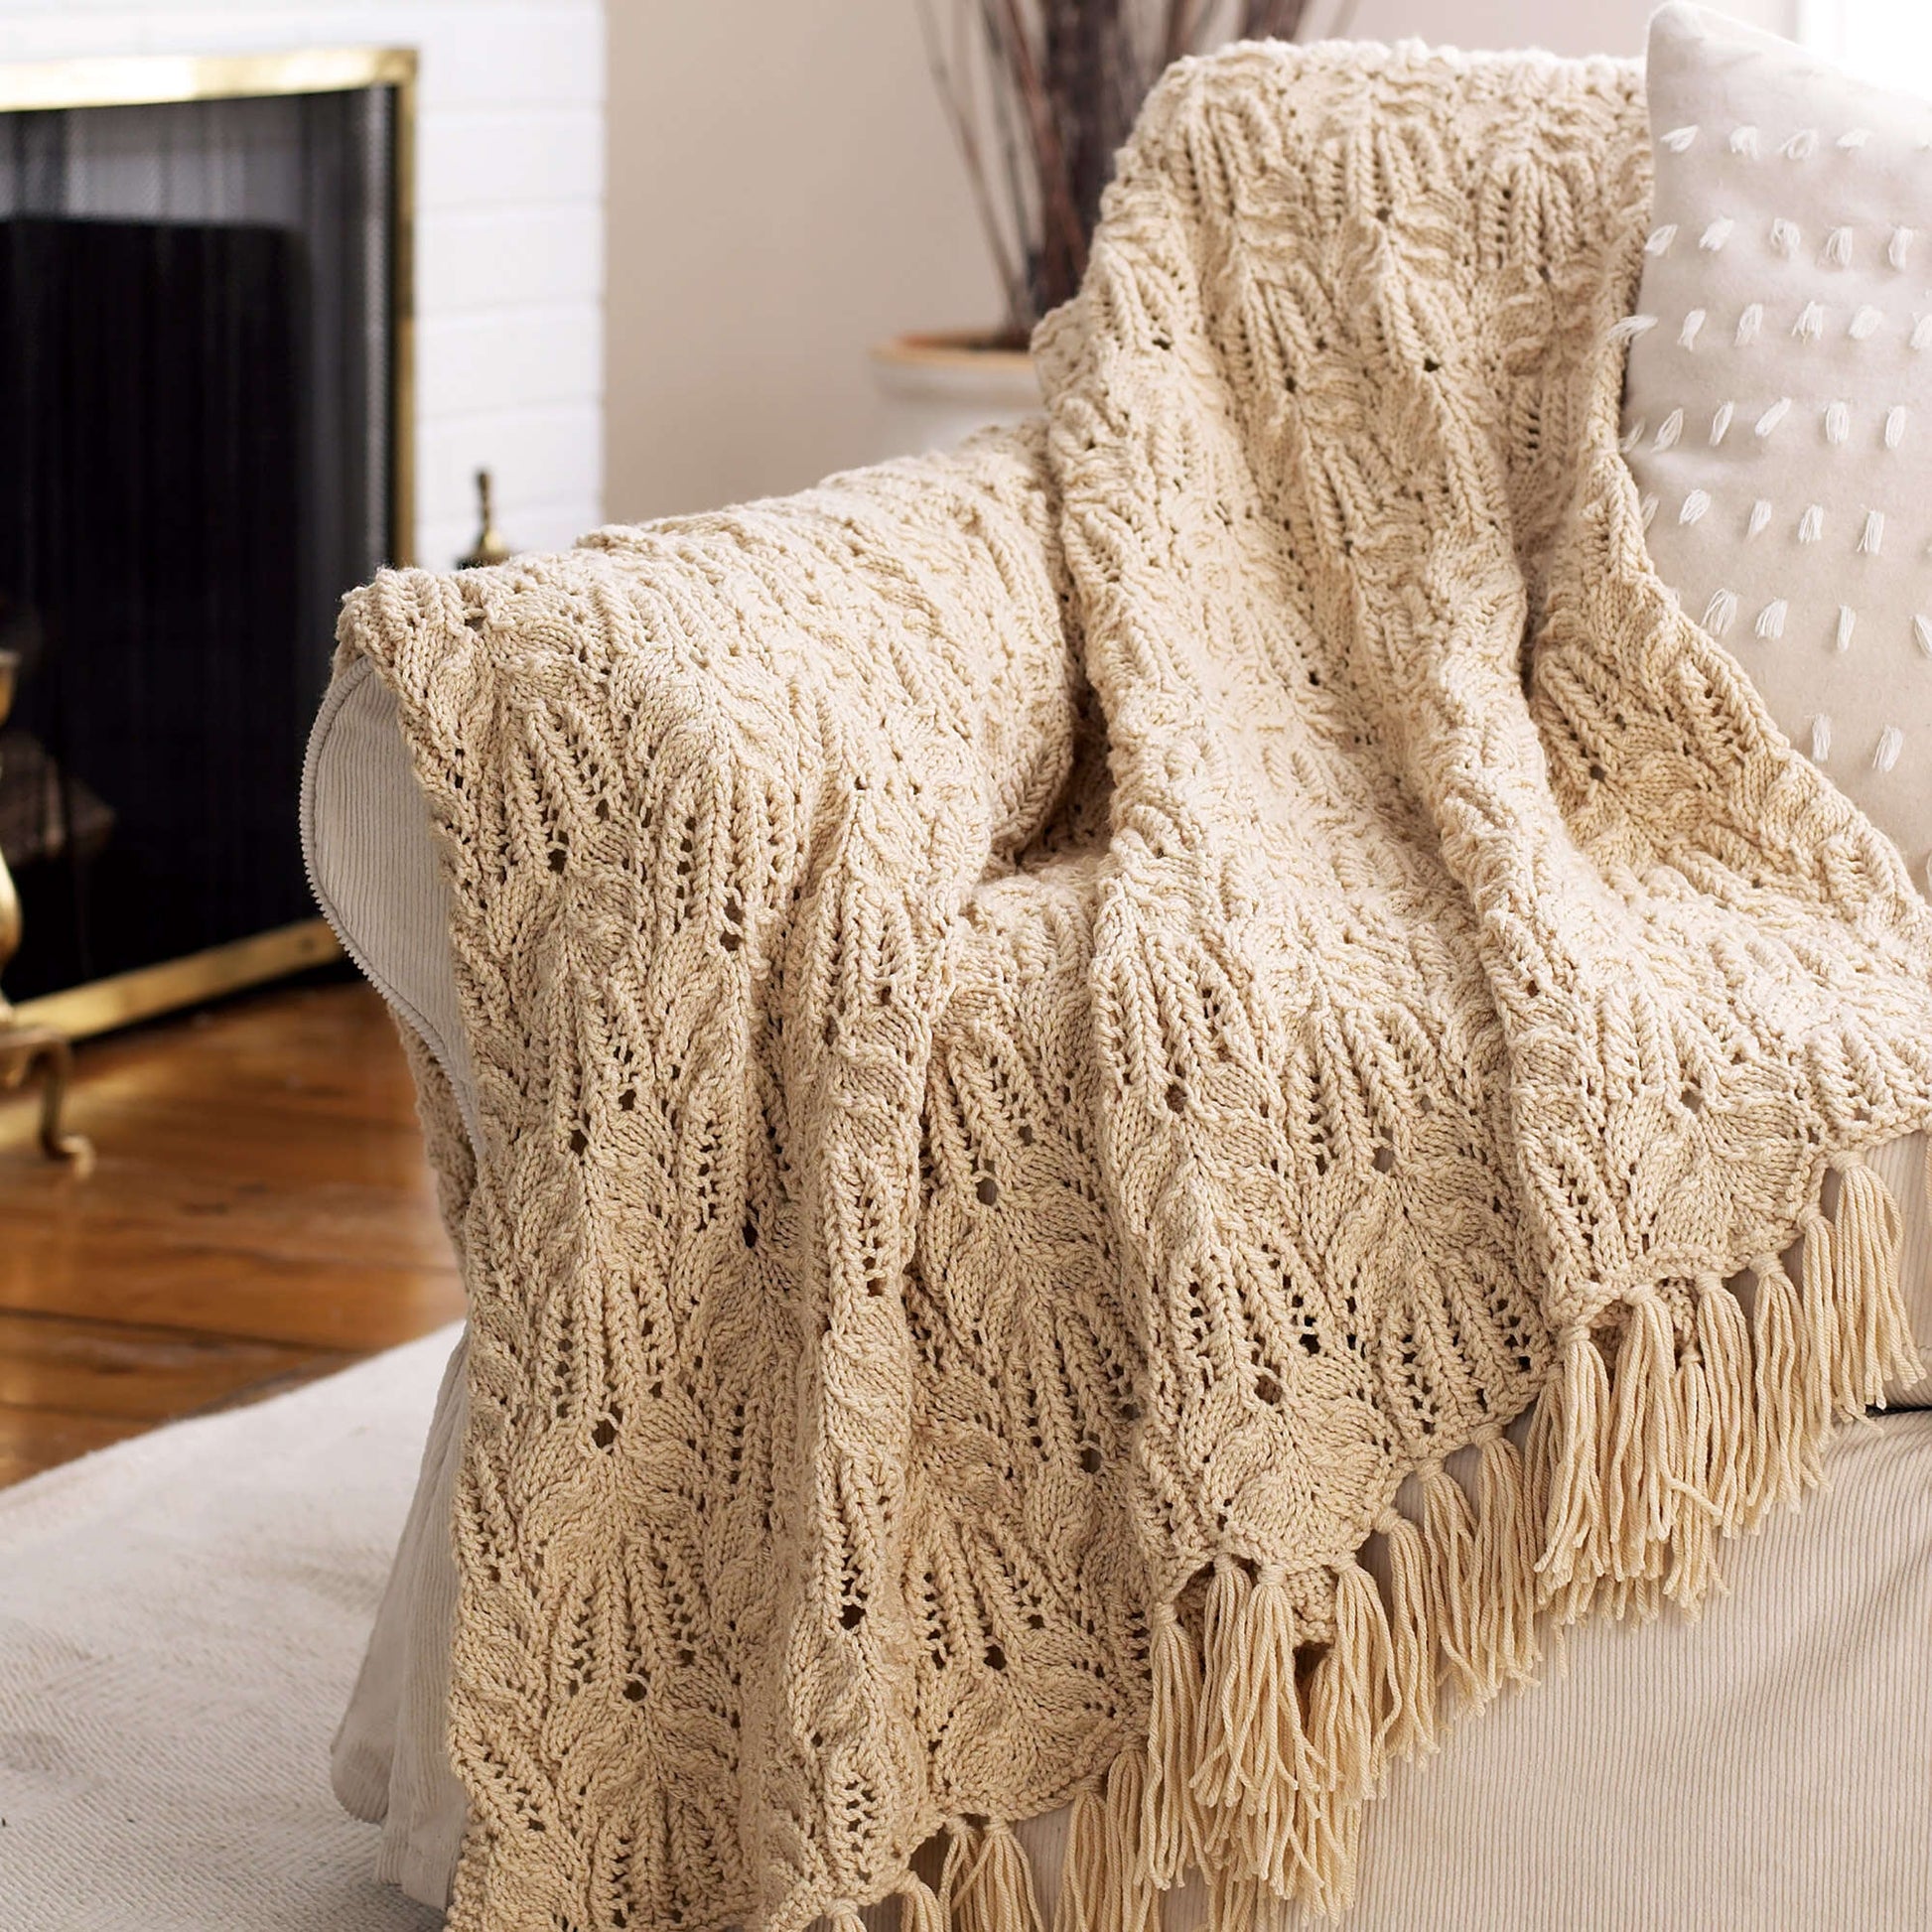 Free Bernat Lace And Cable Afghan Knit Pattern